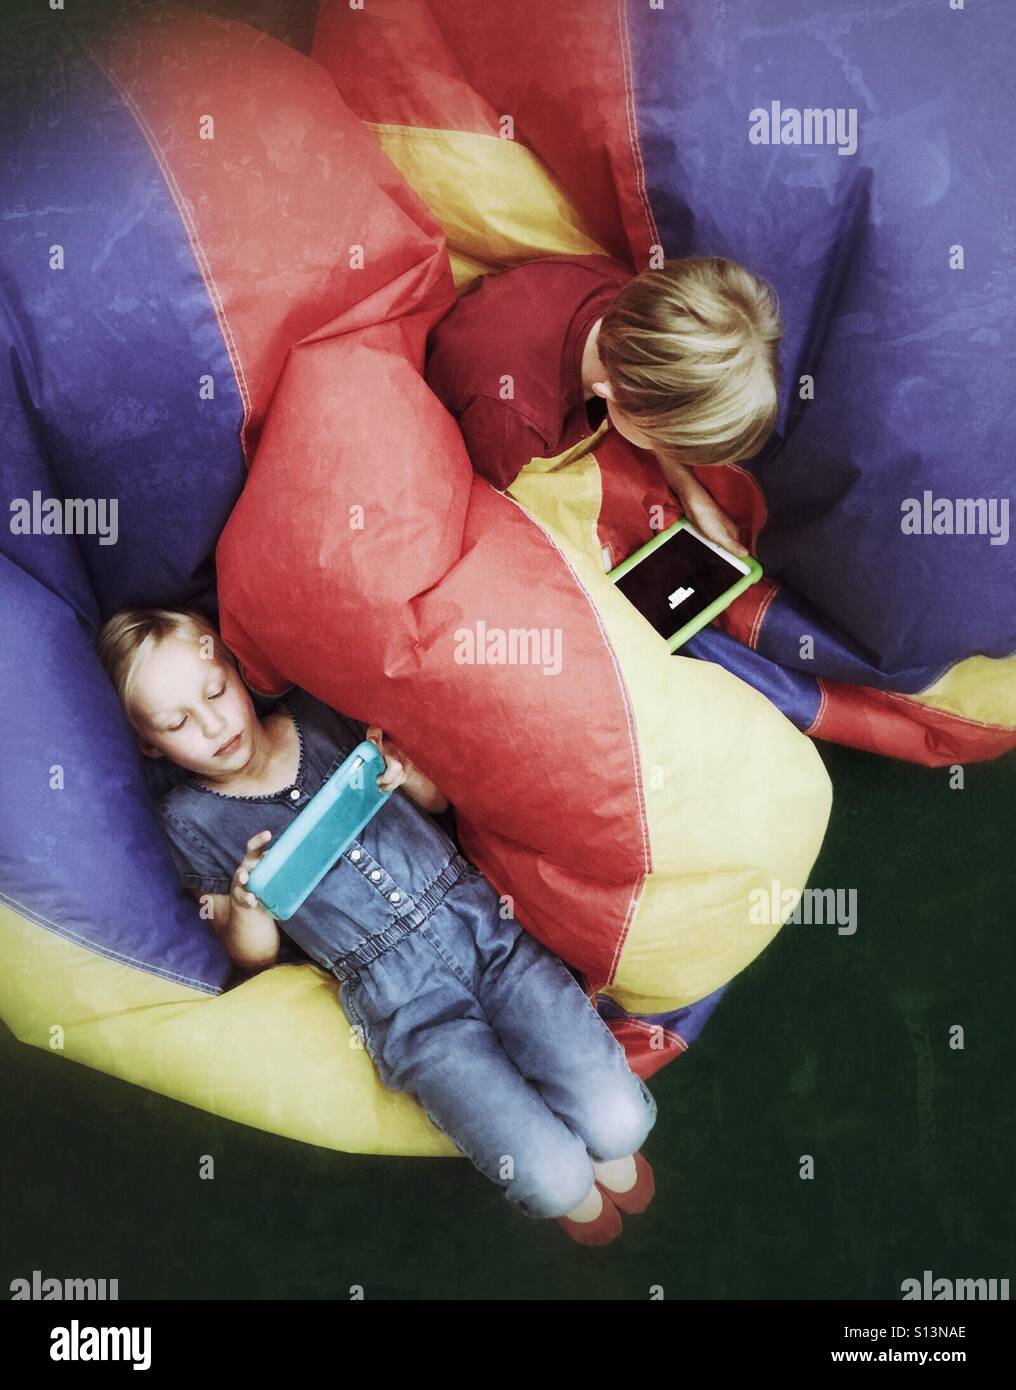 An aerial view of two children playing on their mobile devices while relaxing on partially deflated toy balls. Stock Photo